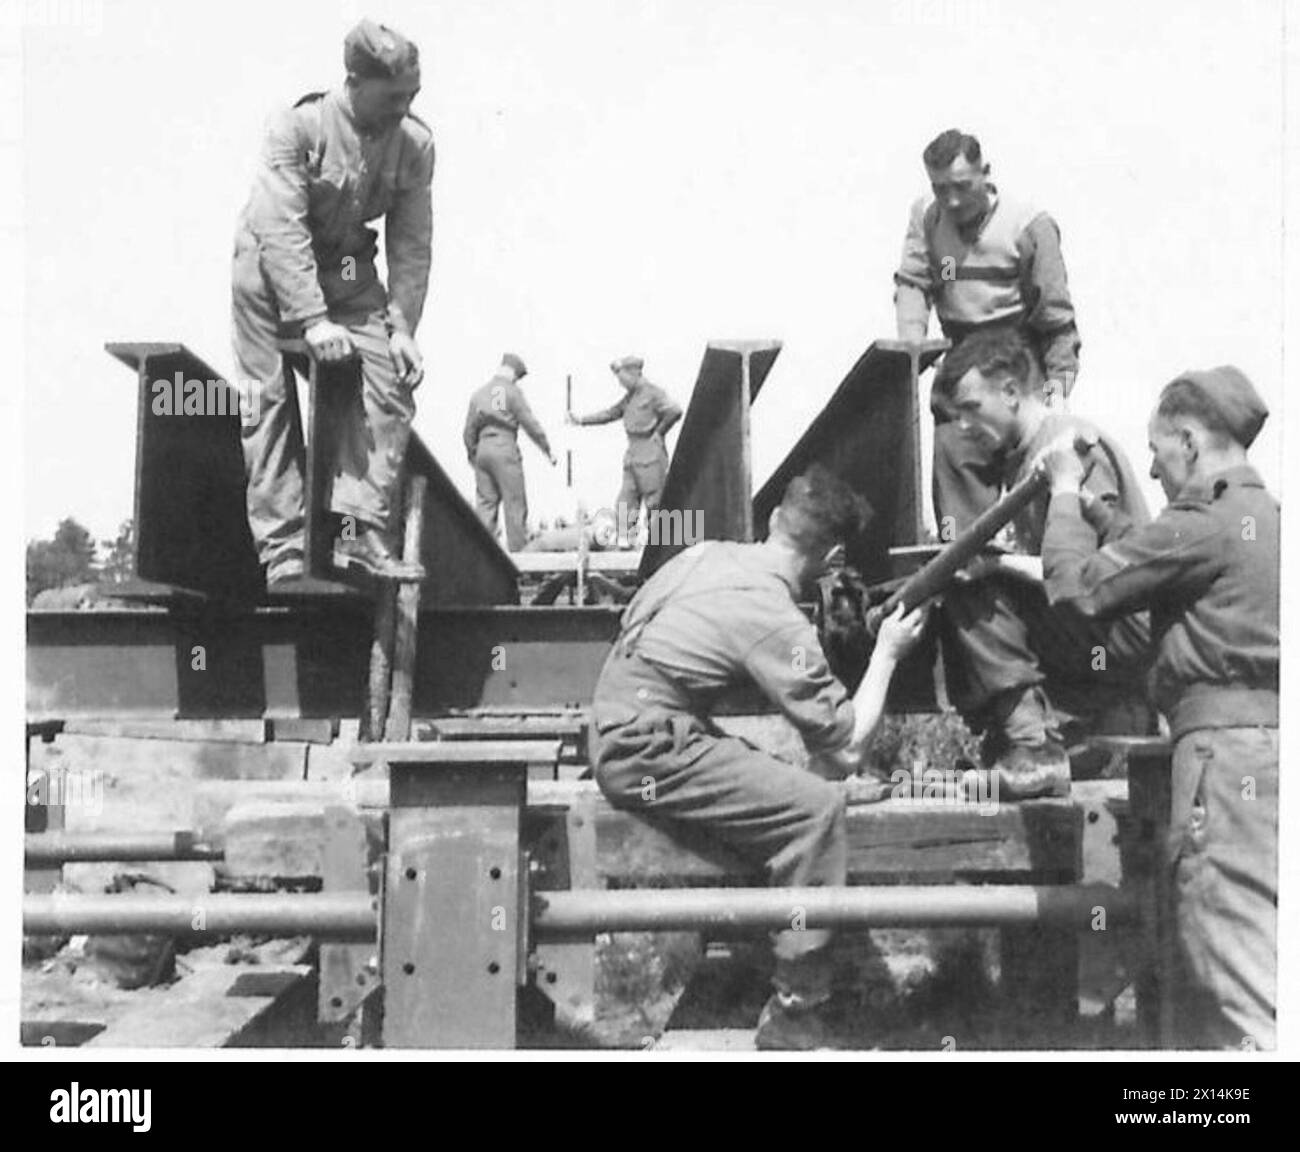 A MILITARY RAILWAY FOR TRAINING R.Es. - Iron girders of the jetty being bolted in postion British Army Stock Photo